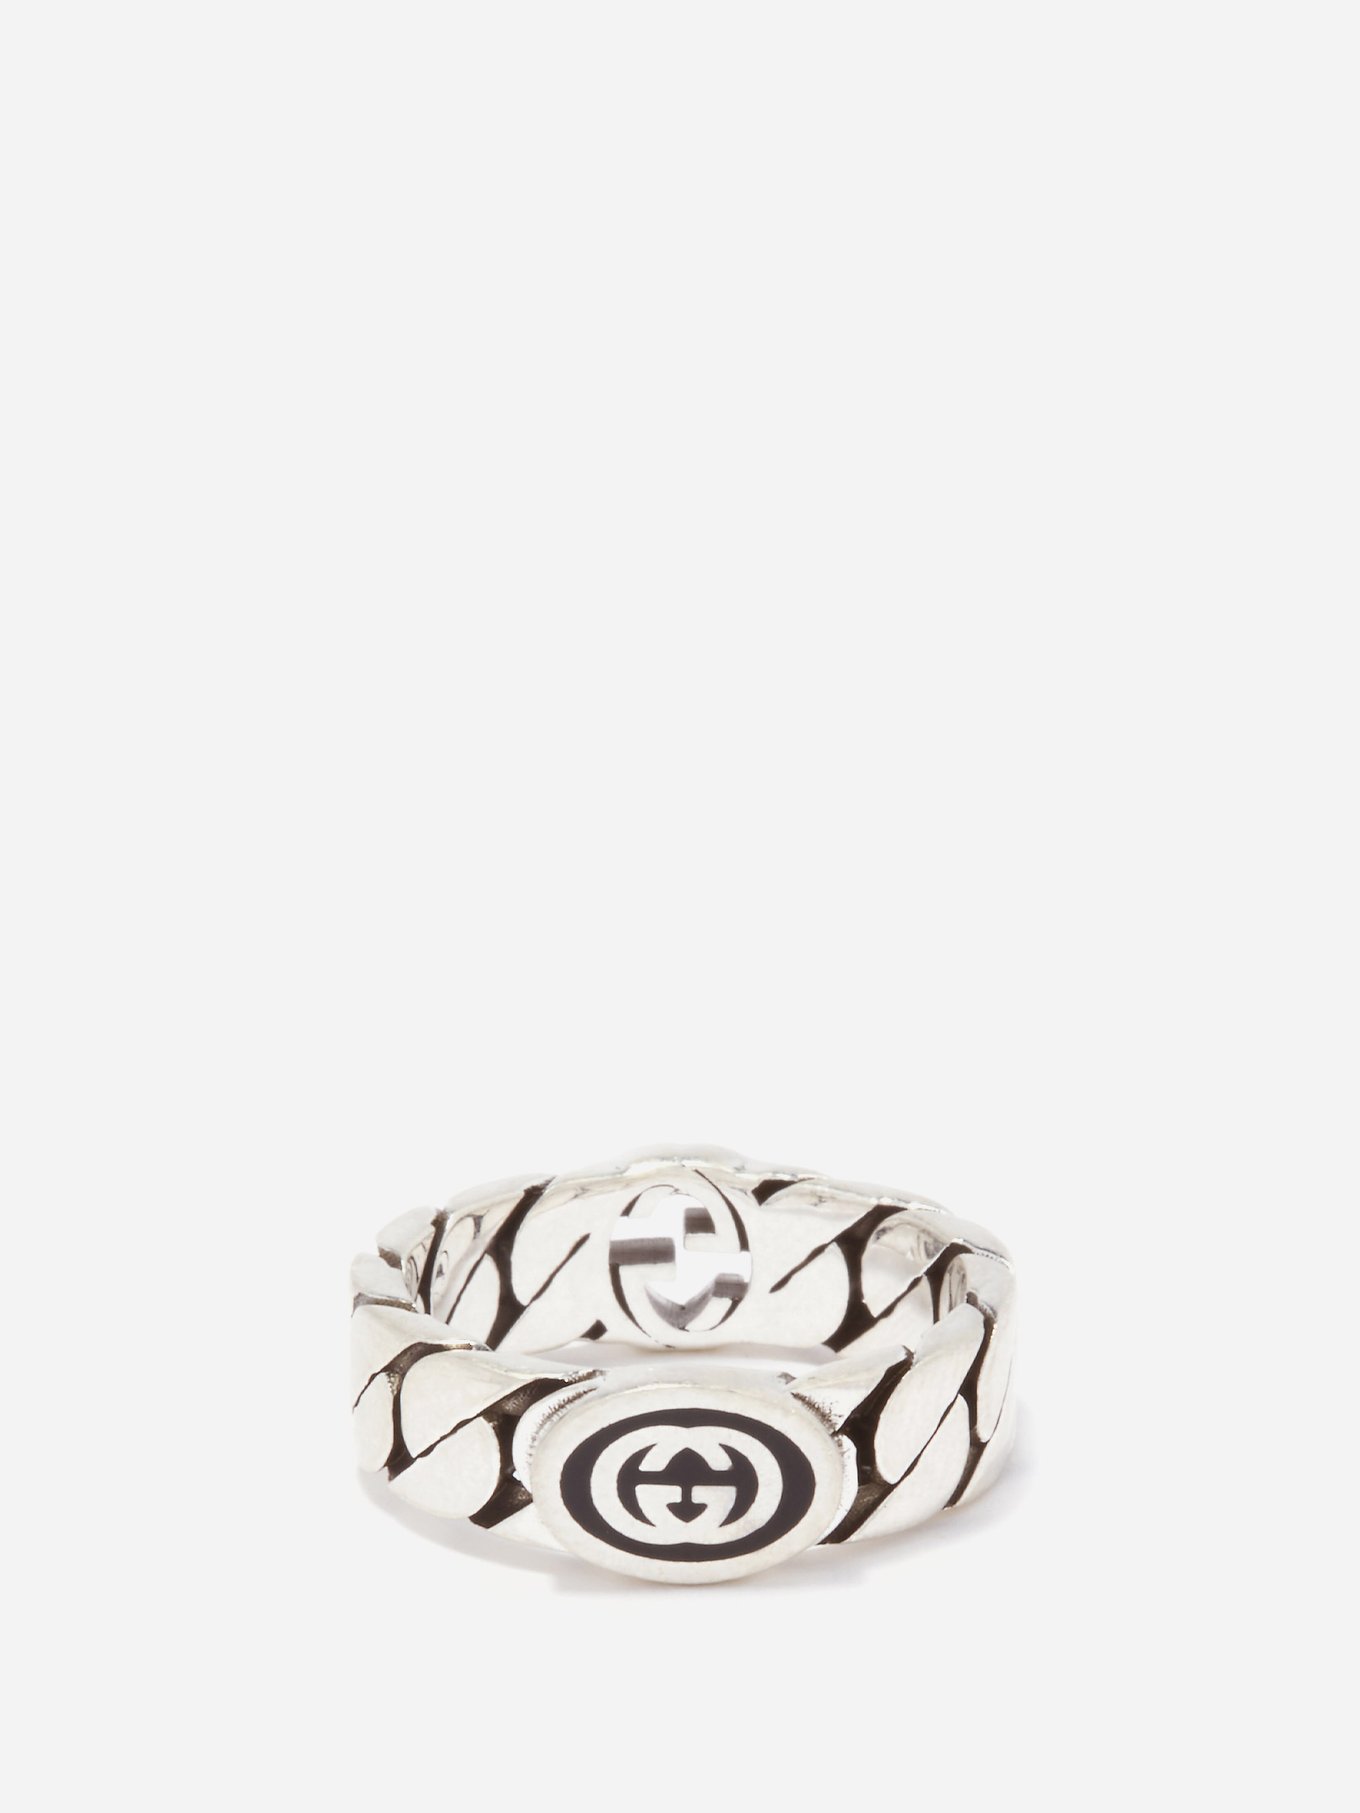 Gucci Interlocking Double G Band Ring 925 Sterling Silver Size 18